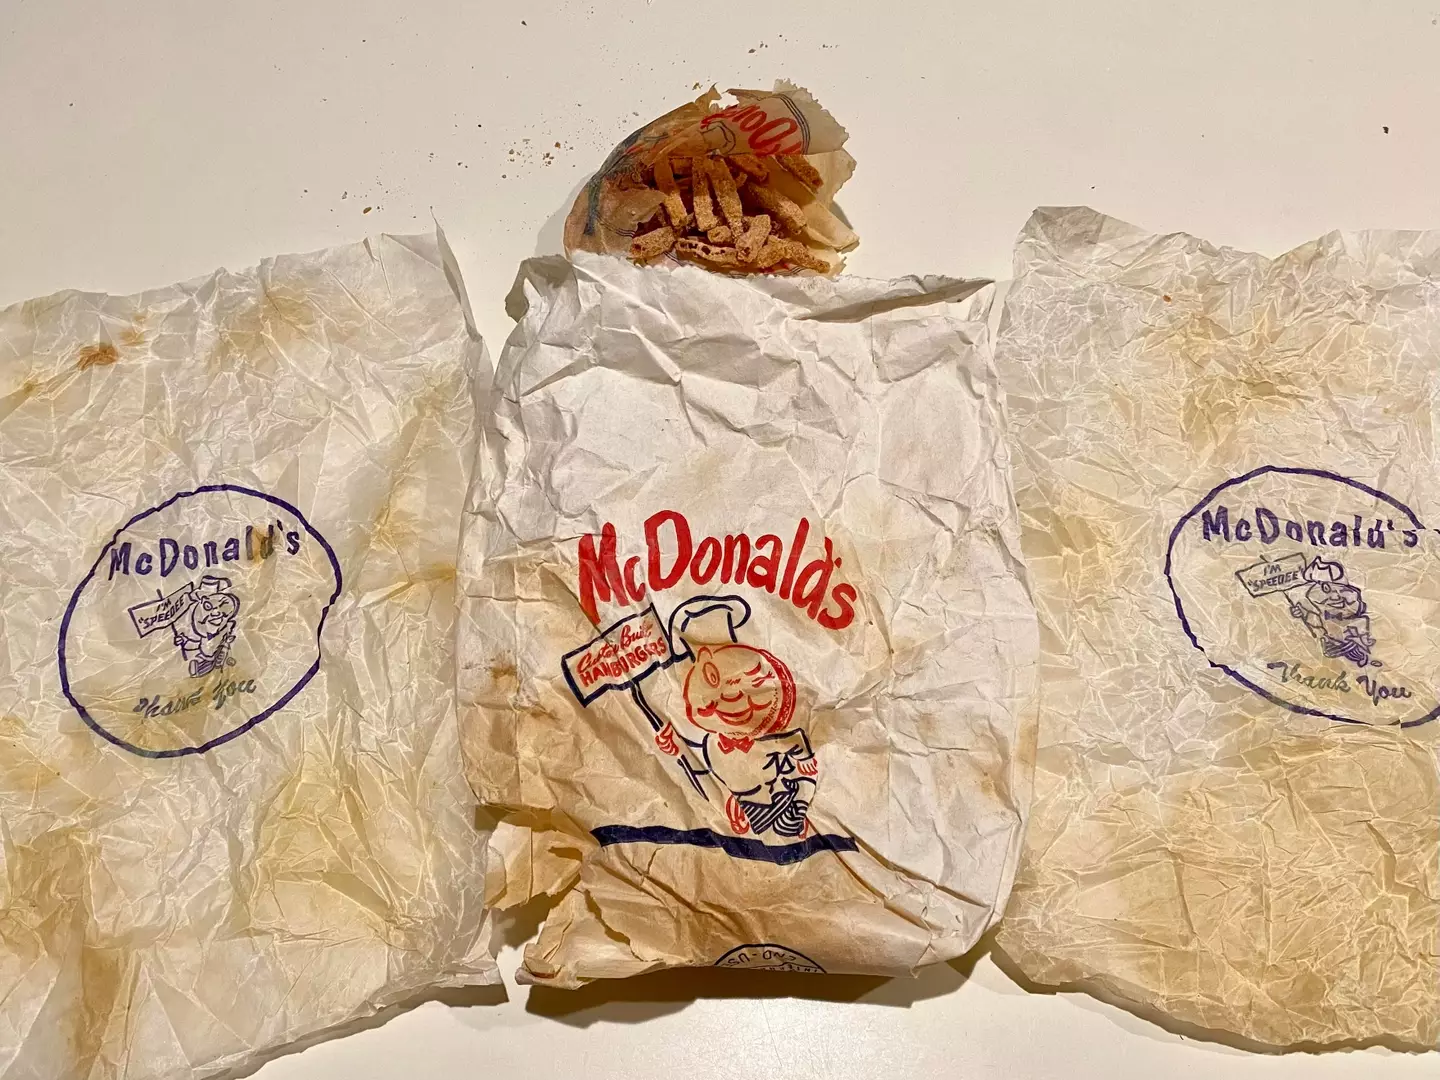 The McDonald's bags had somehow been perfectly preserved.